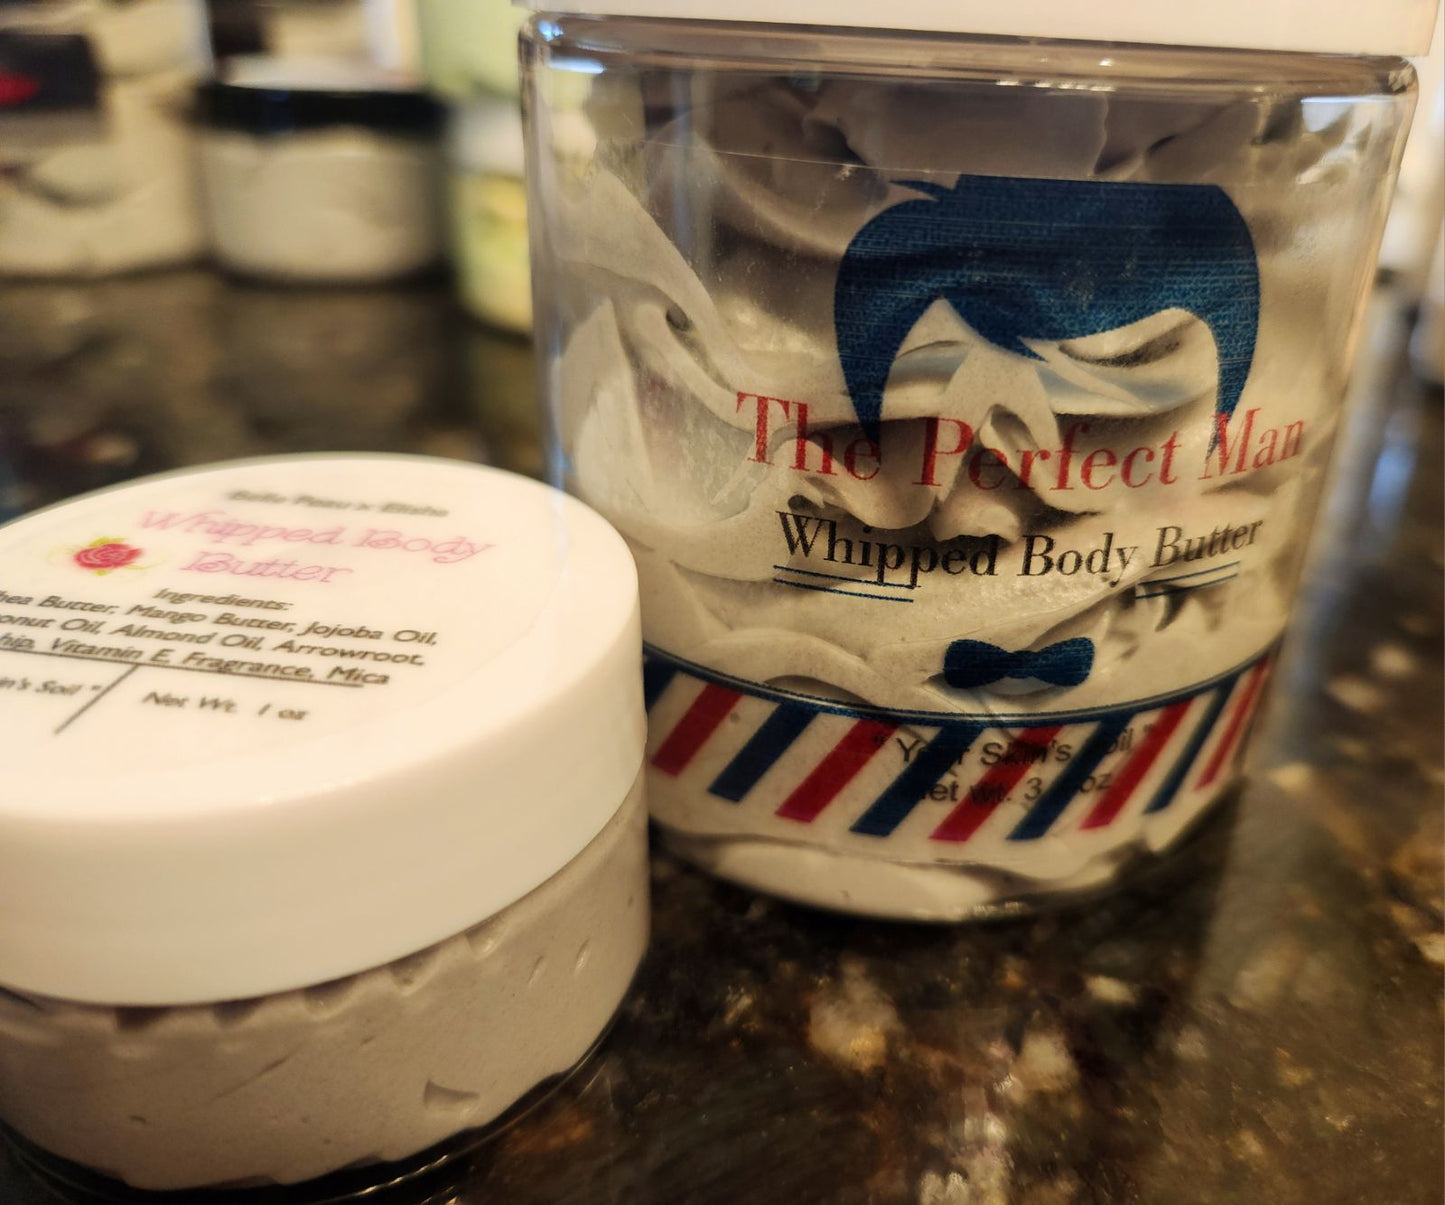 The Perfect Man Body Butter